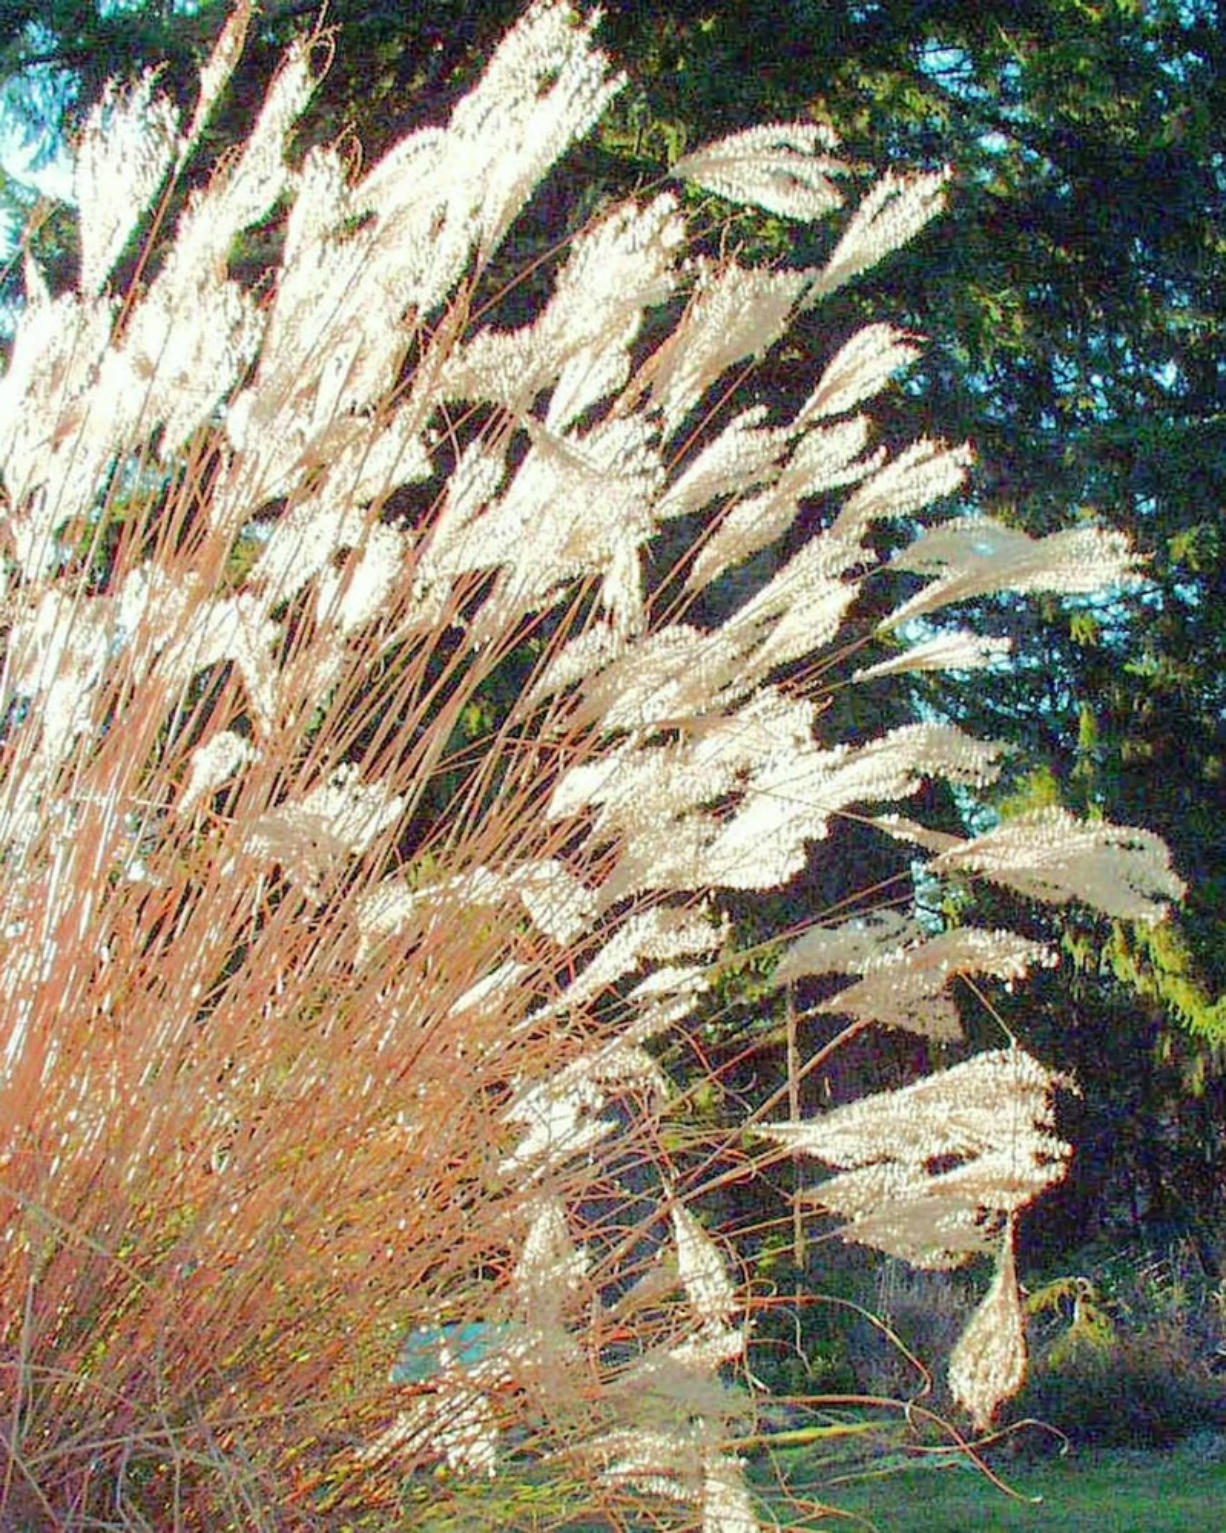 Even in late winter, the ornamental grasses maintain their presence in the garden.